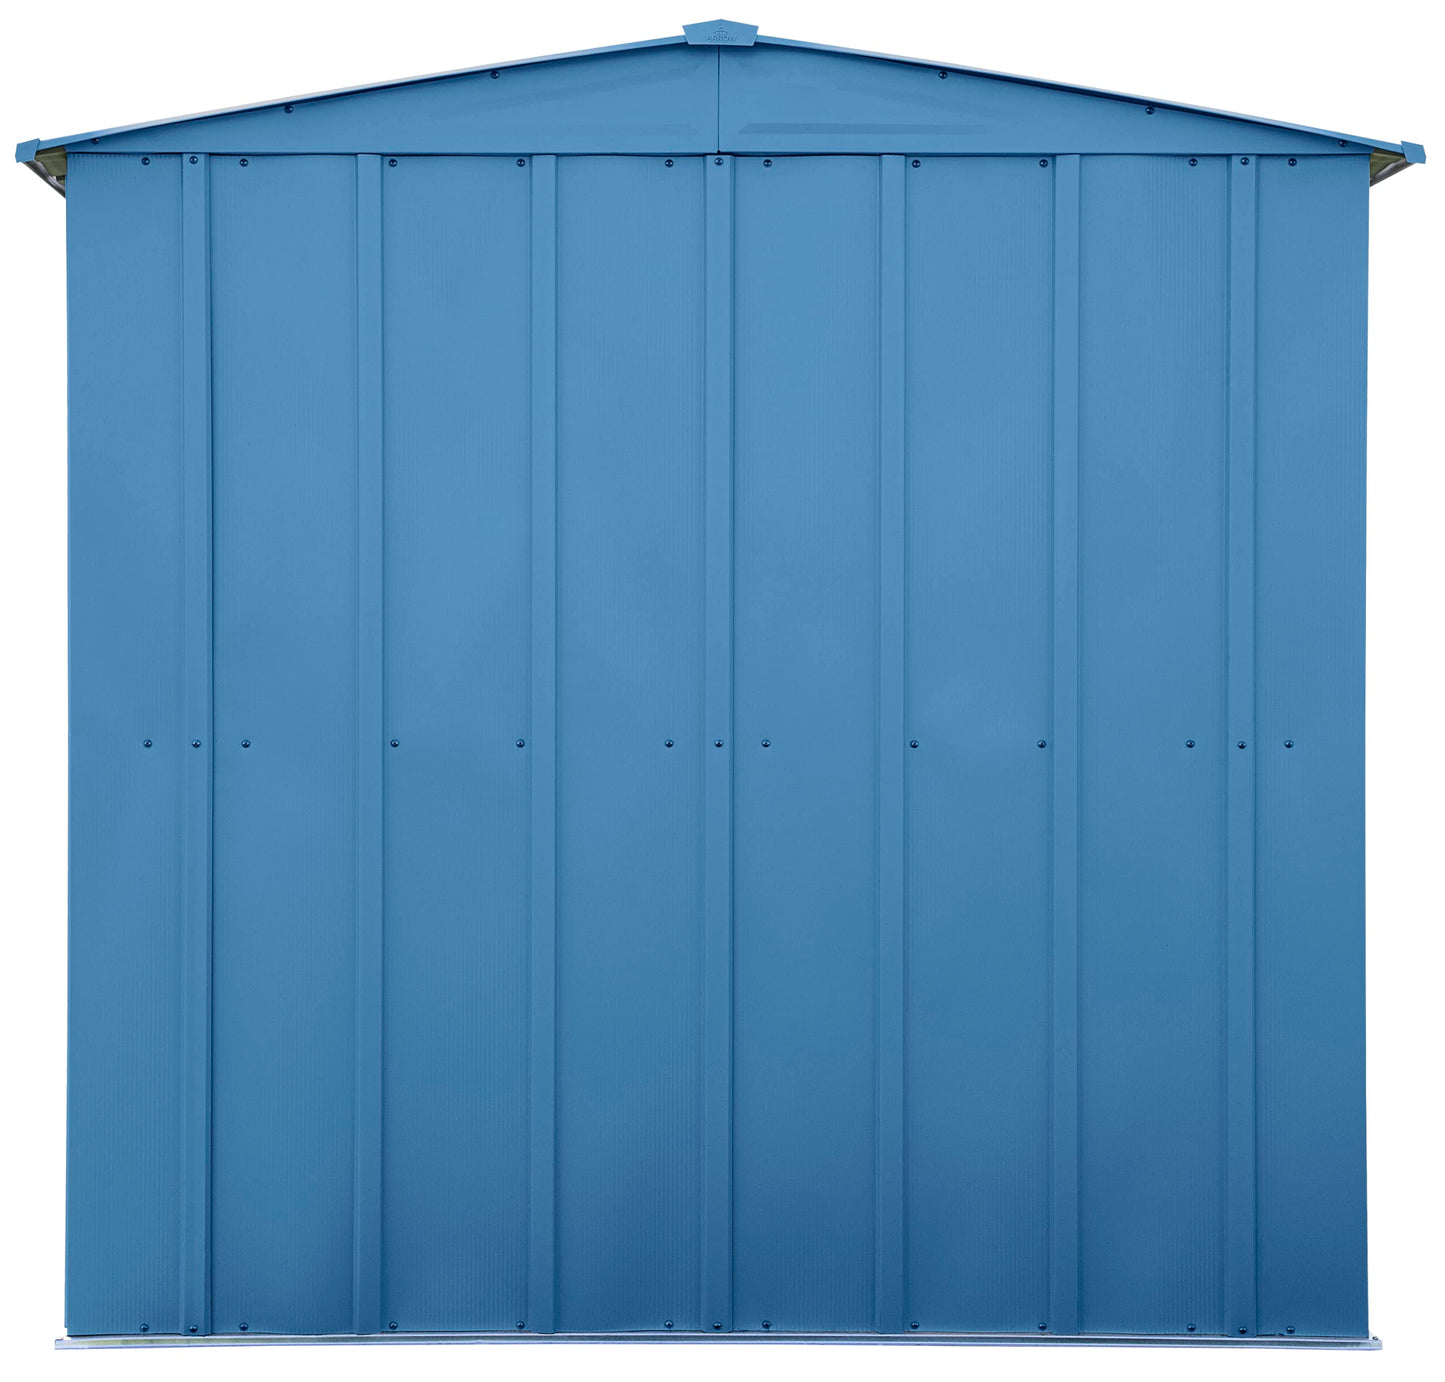 Arrow Shed Classic 6' x 7' Outdoor Padlockable Steel Storage Shed Building,Blue Grey Blue Grey 6' x 7'